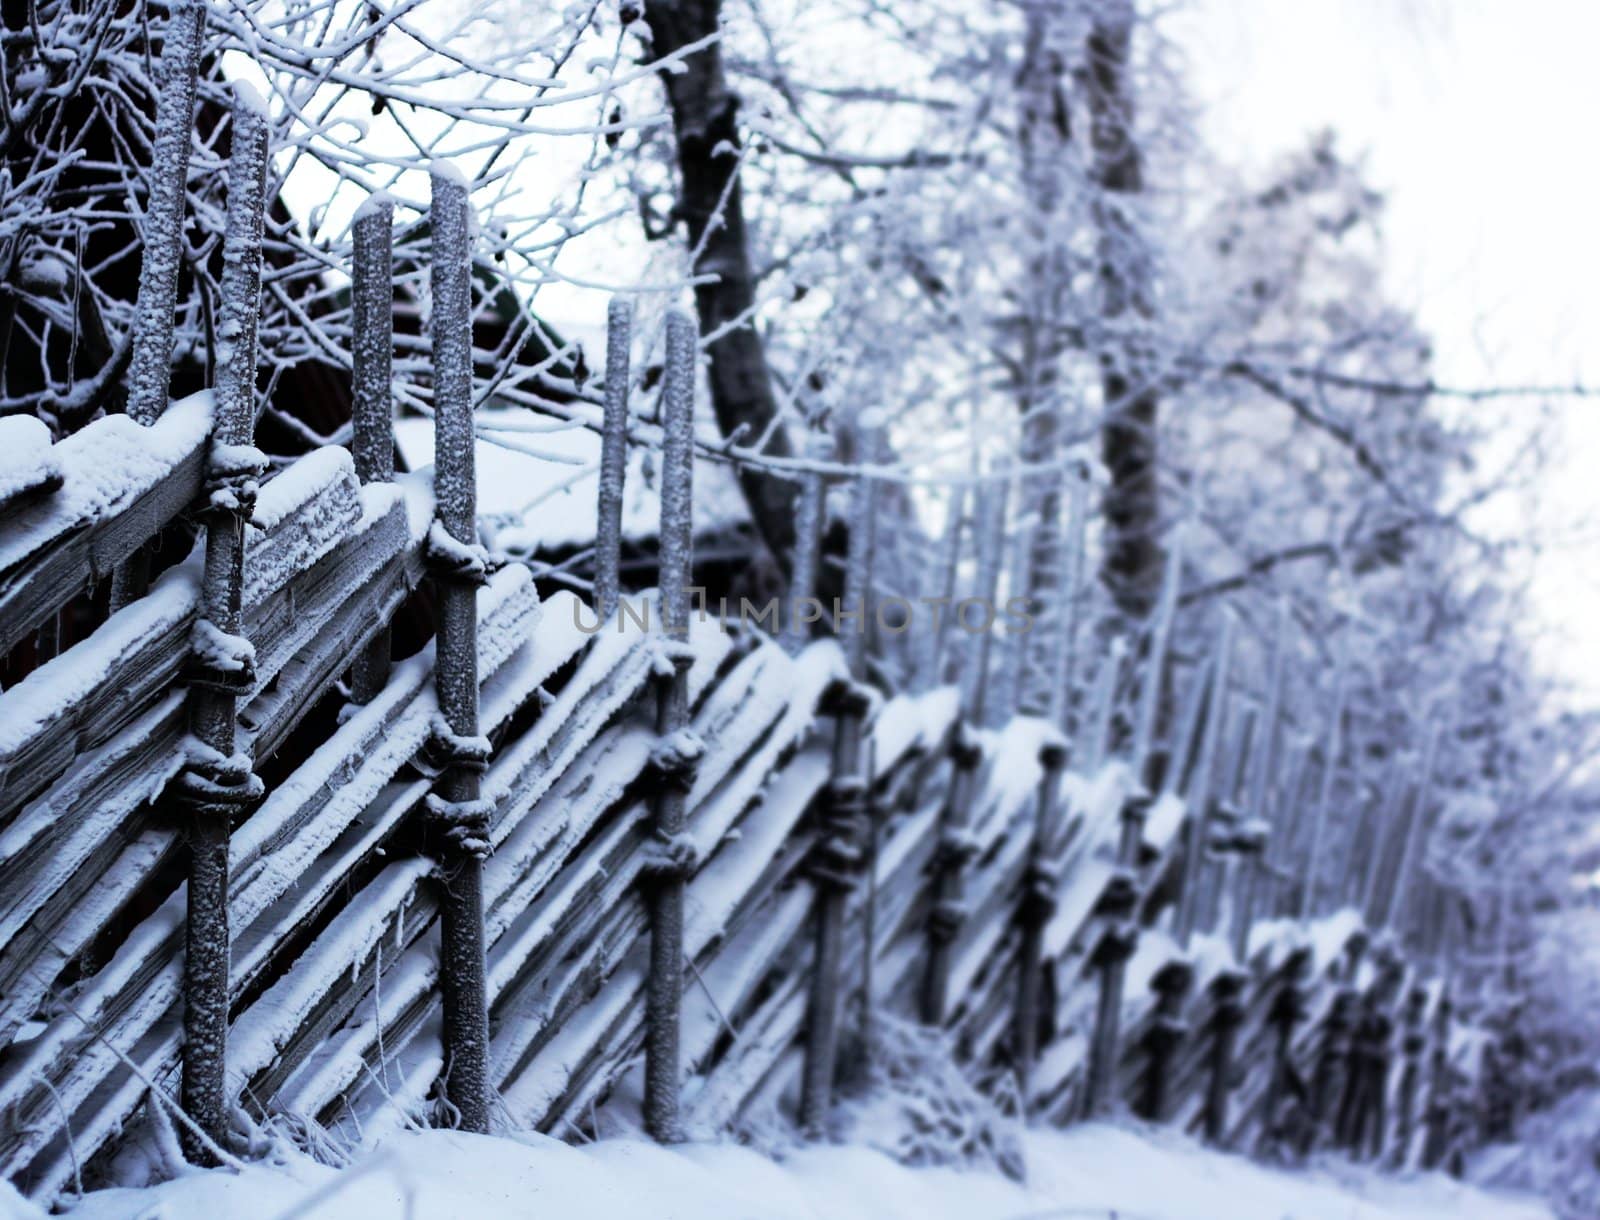 Wooden fence covered in snow by sundaune